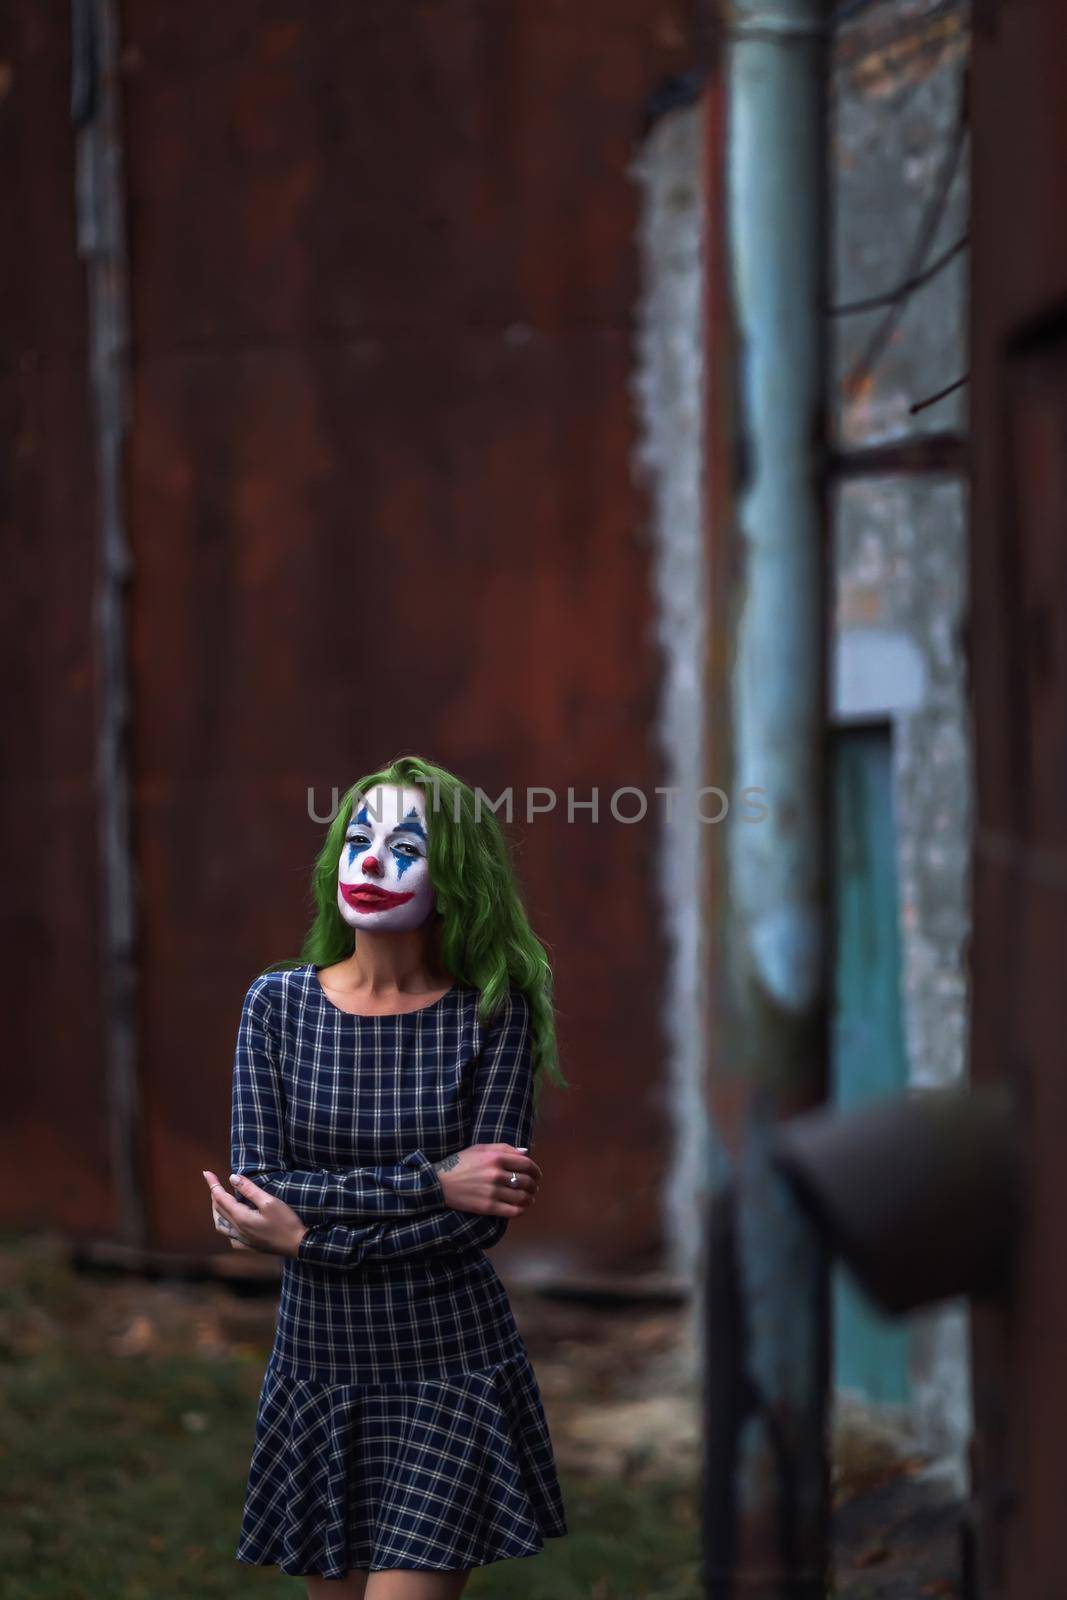 Portrait of a greenhaired girl in chekered dress with joker makeup on a atmospheric rusty metal wall background.